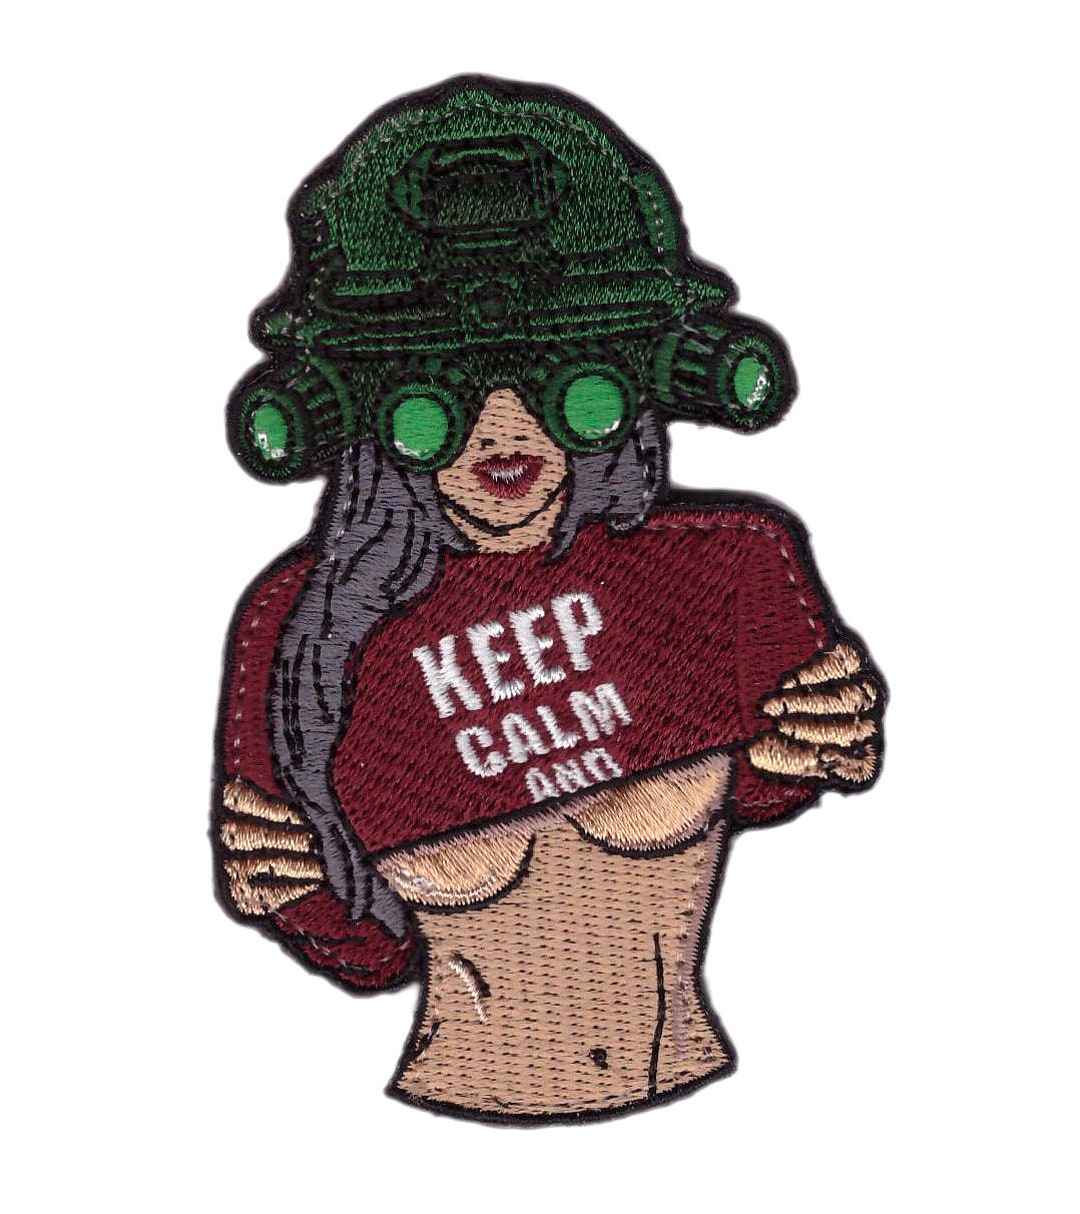 Keep Calm and Reload Funny Patch PVC Removable Emblem Brown Patches for  Morale - Helia Beer Co